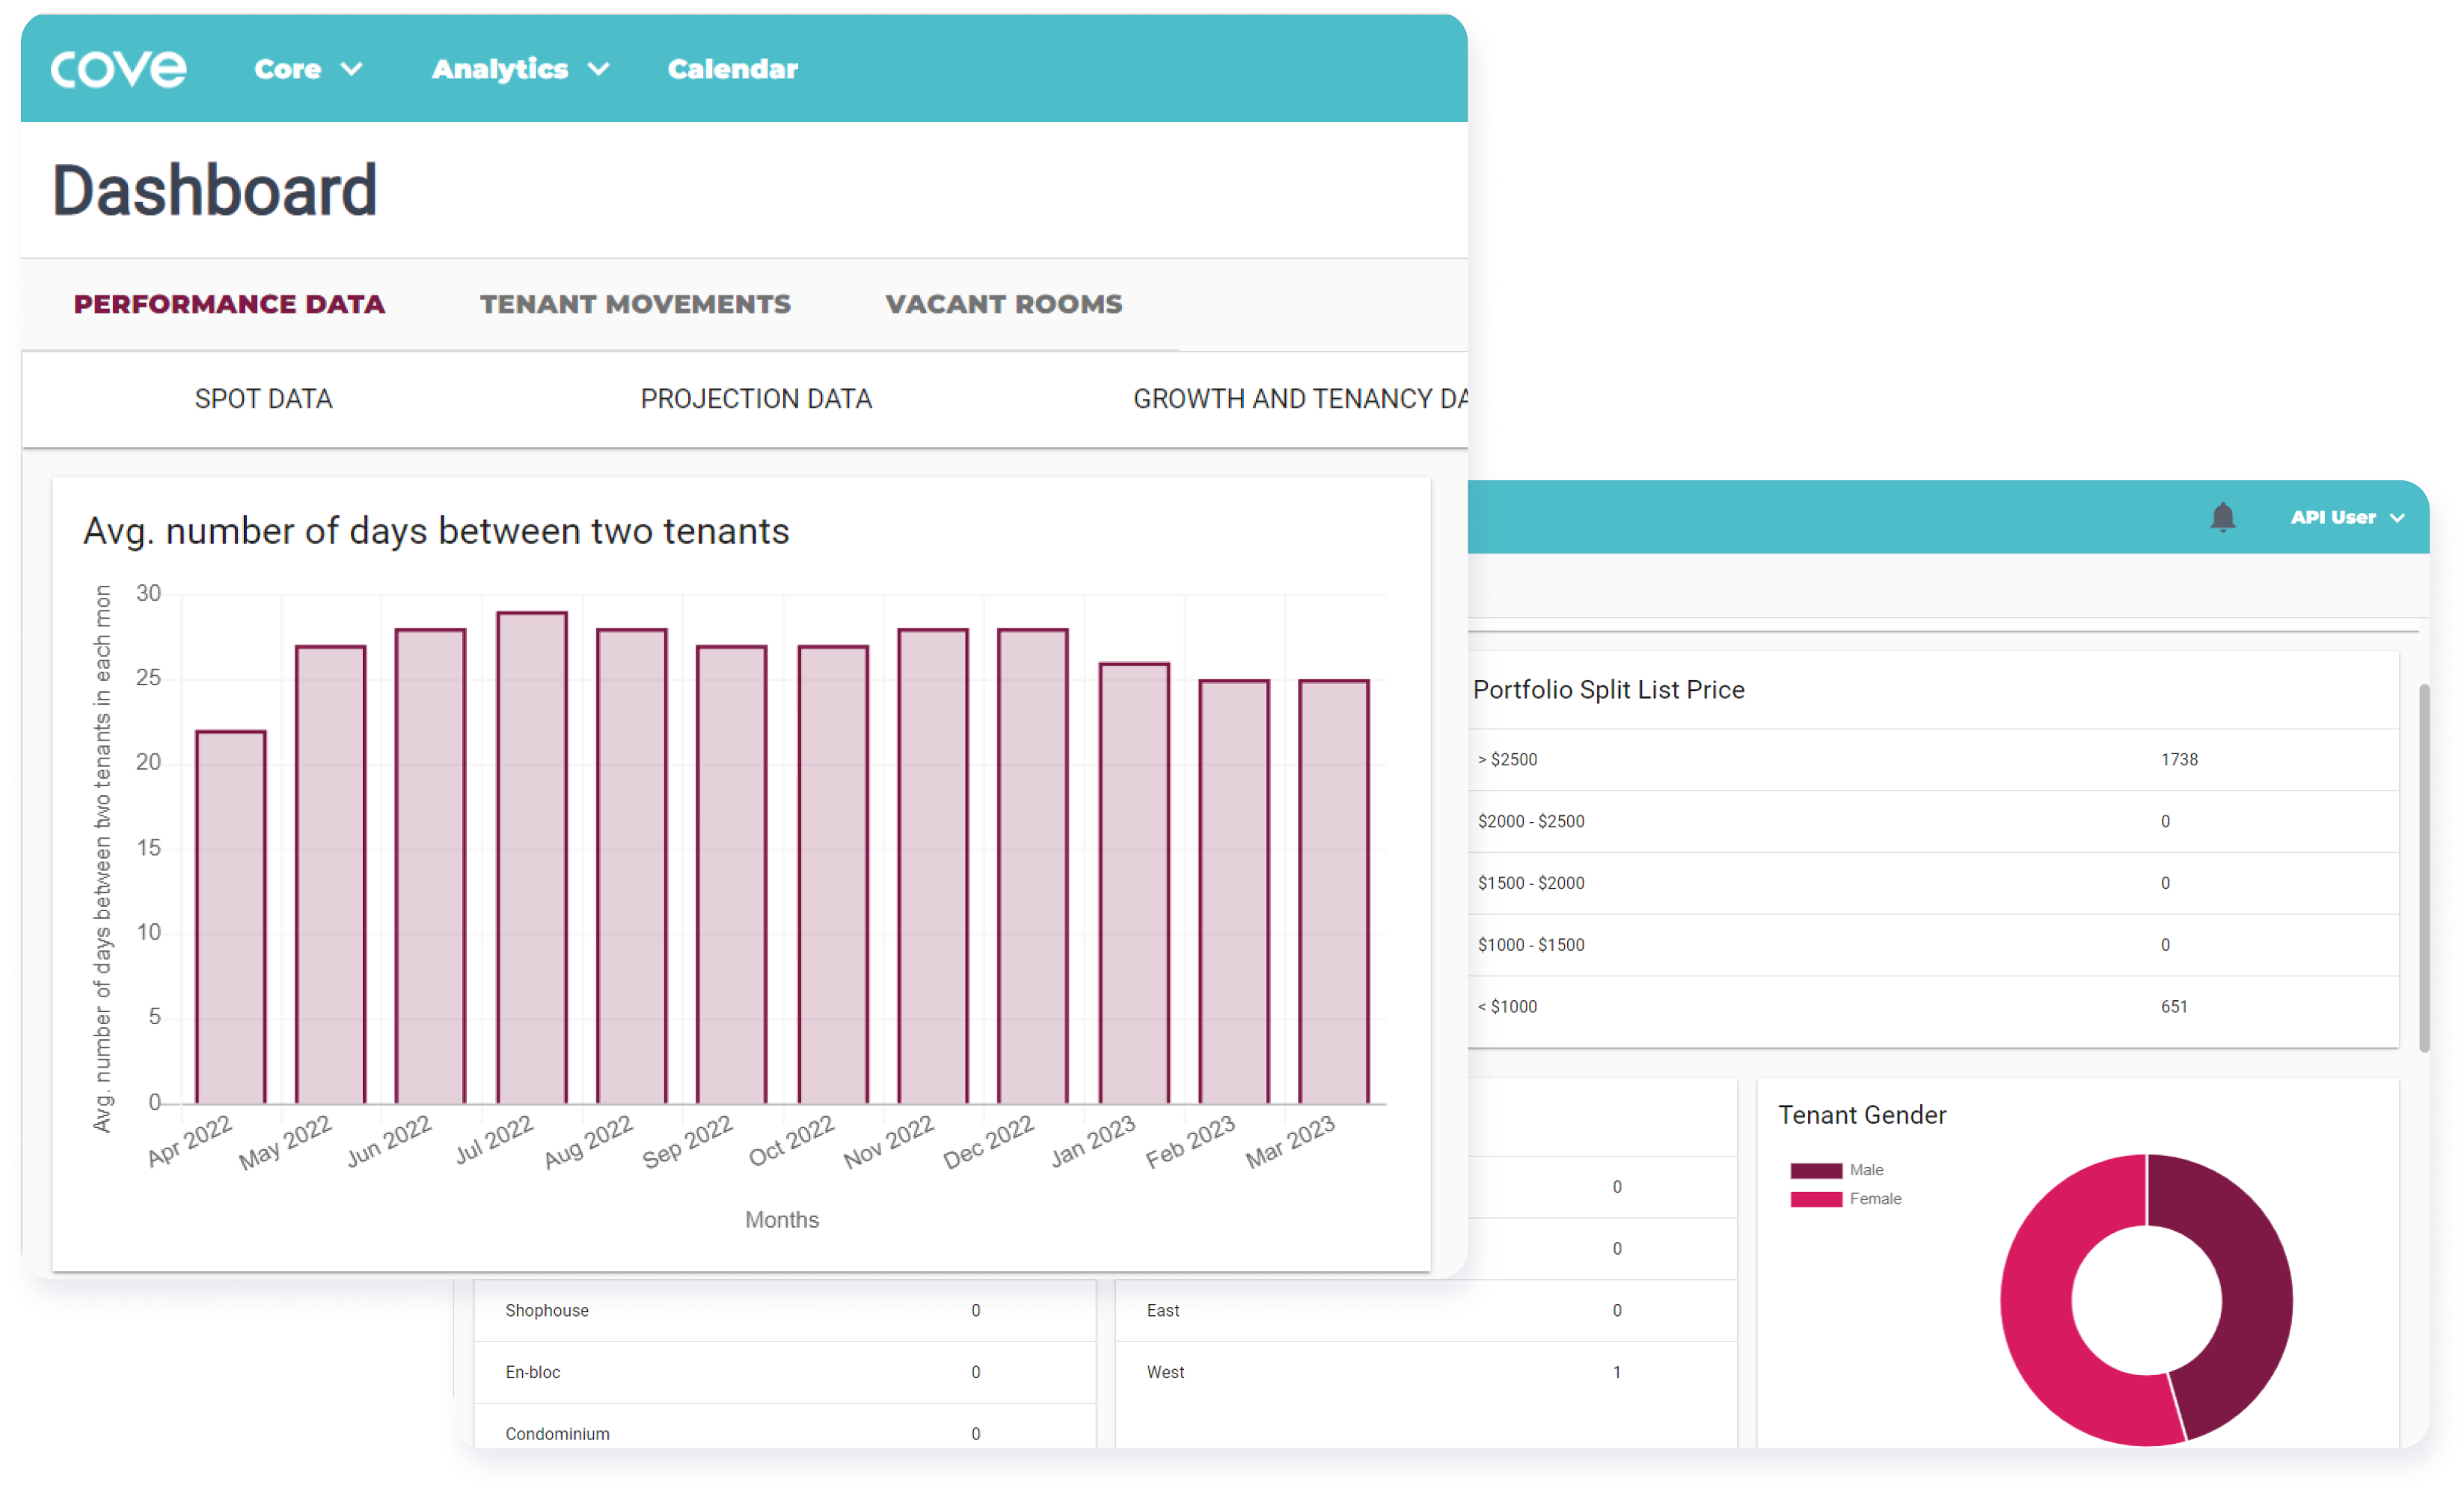 Our Property Management Solution's Analytics Dashboard